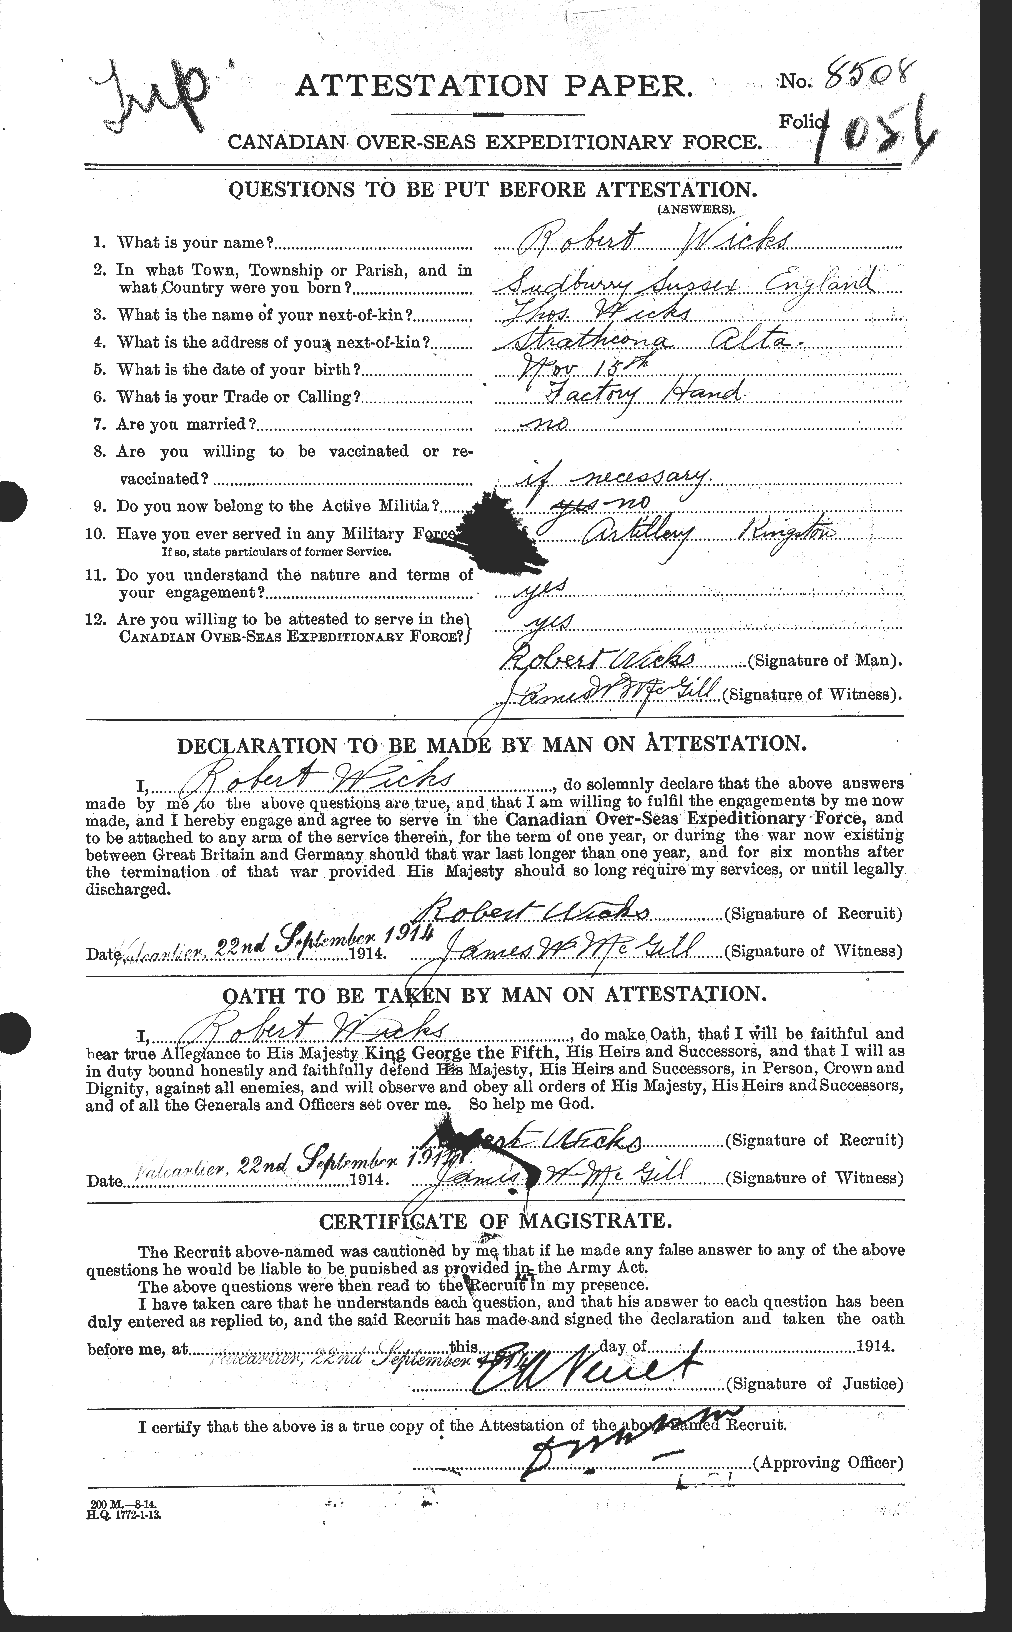 Personnel Records of the First World War - CEF 674013a